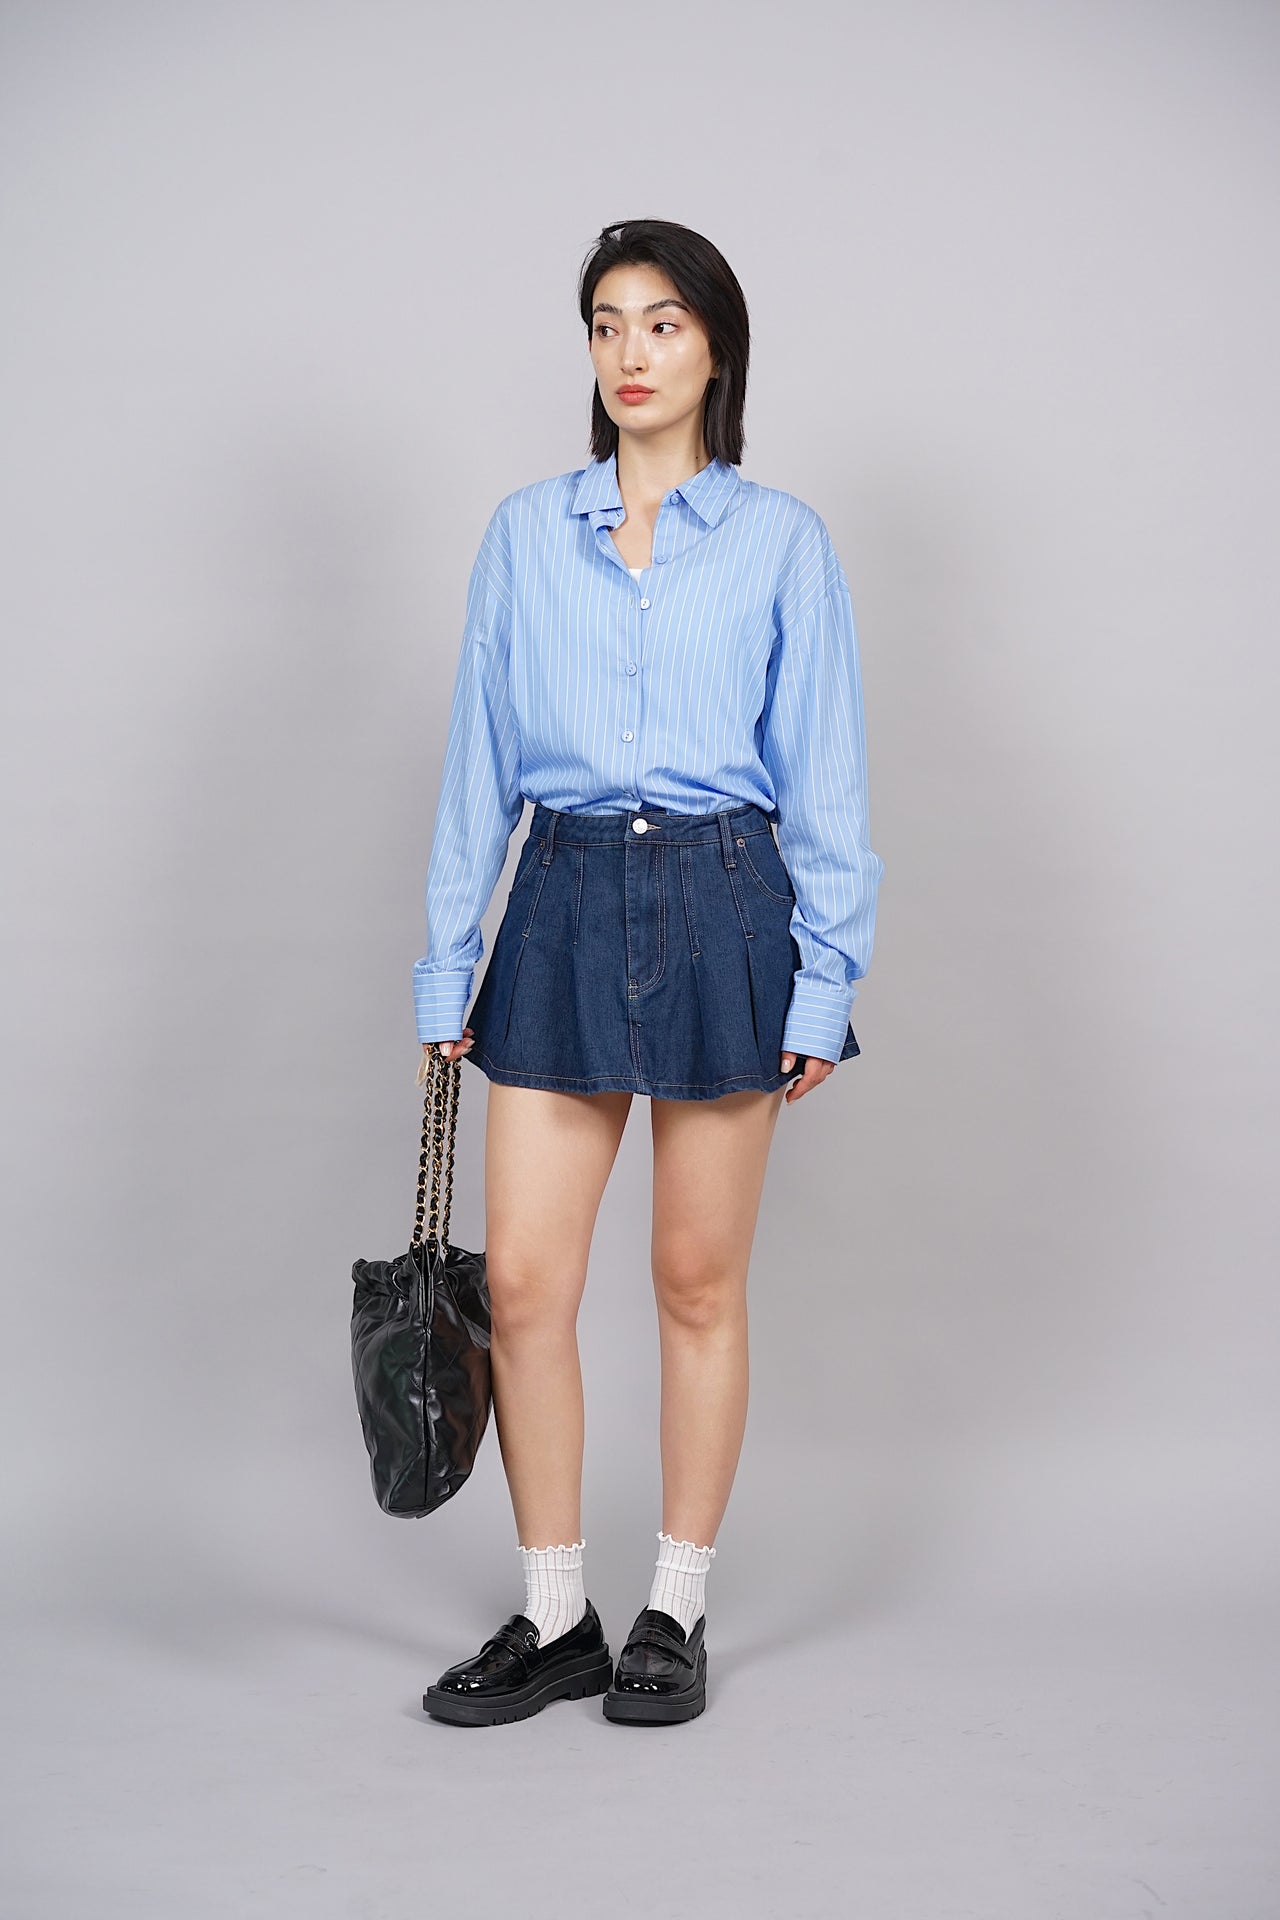 Collared Button-Down Shirt in Blue Pinstripes - Arriving Soon